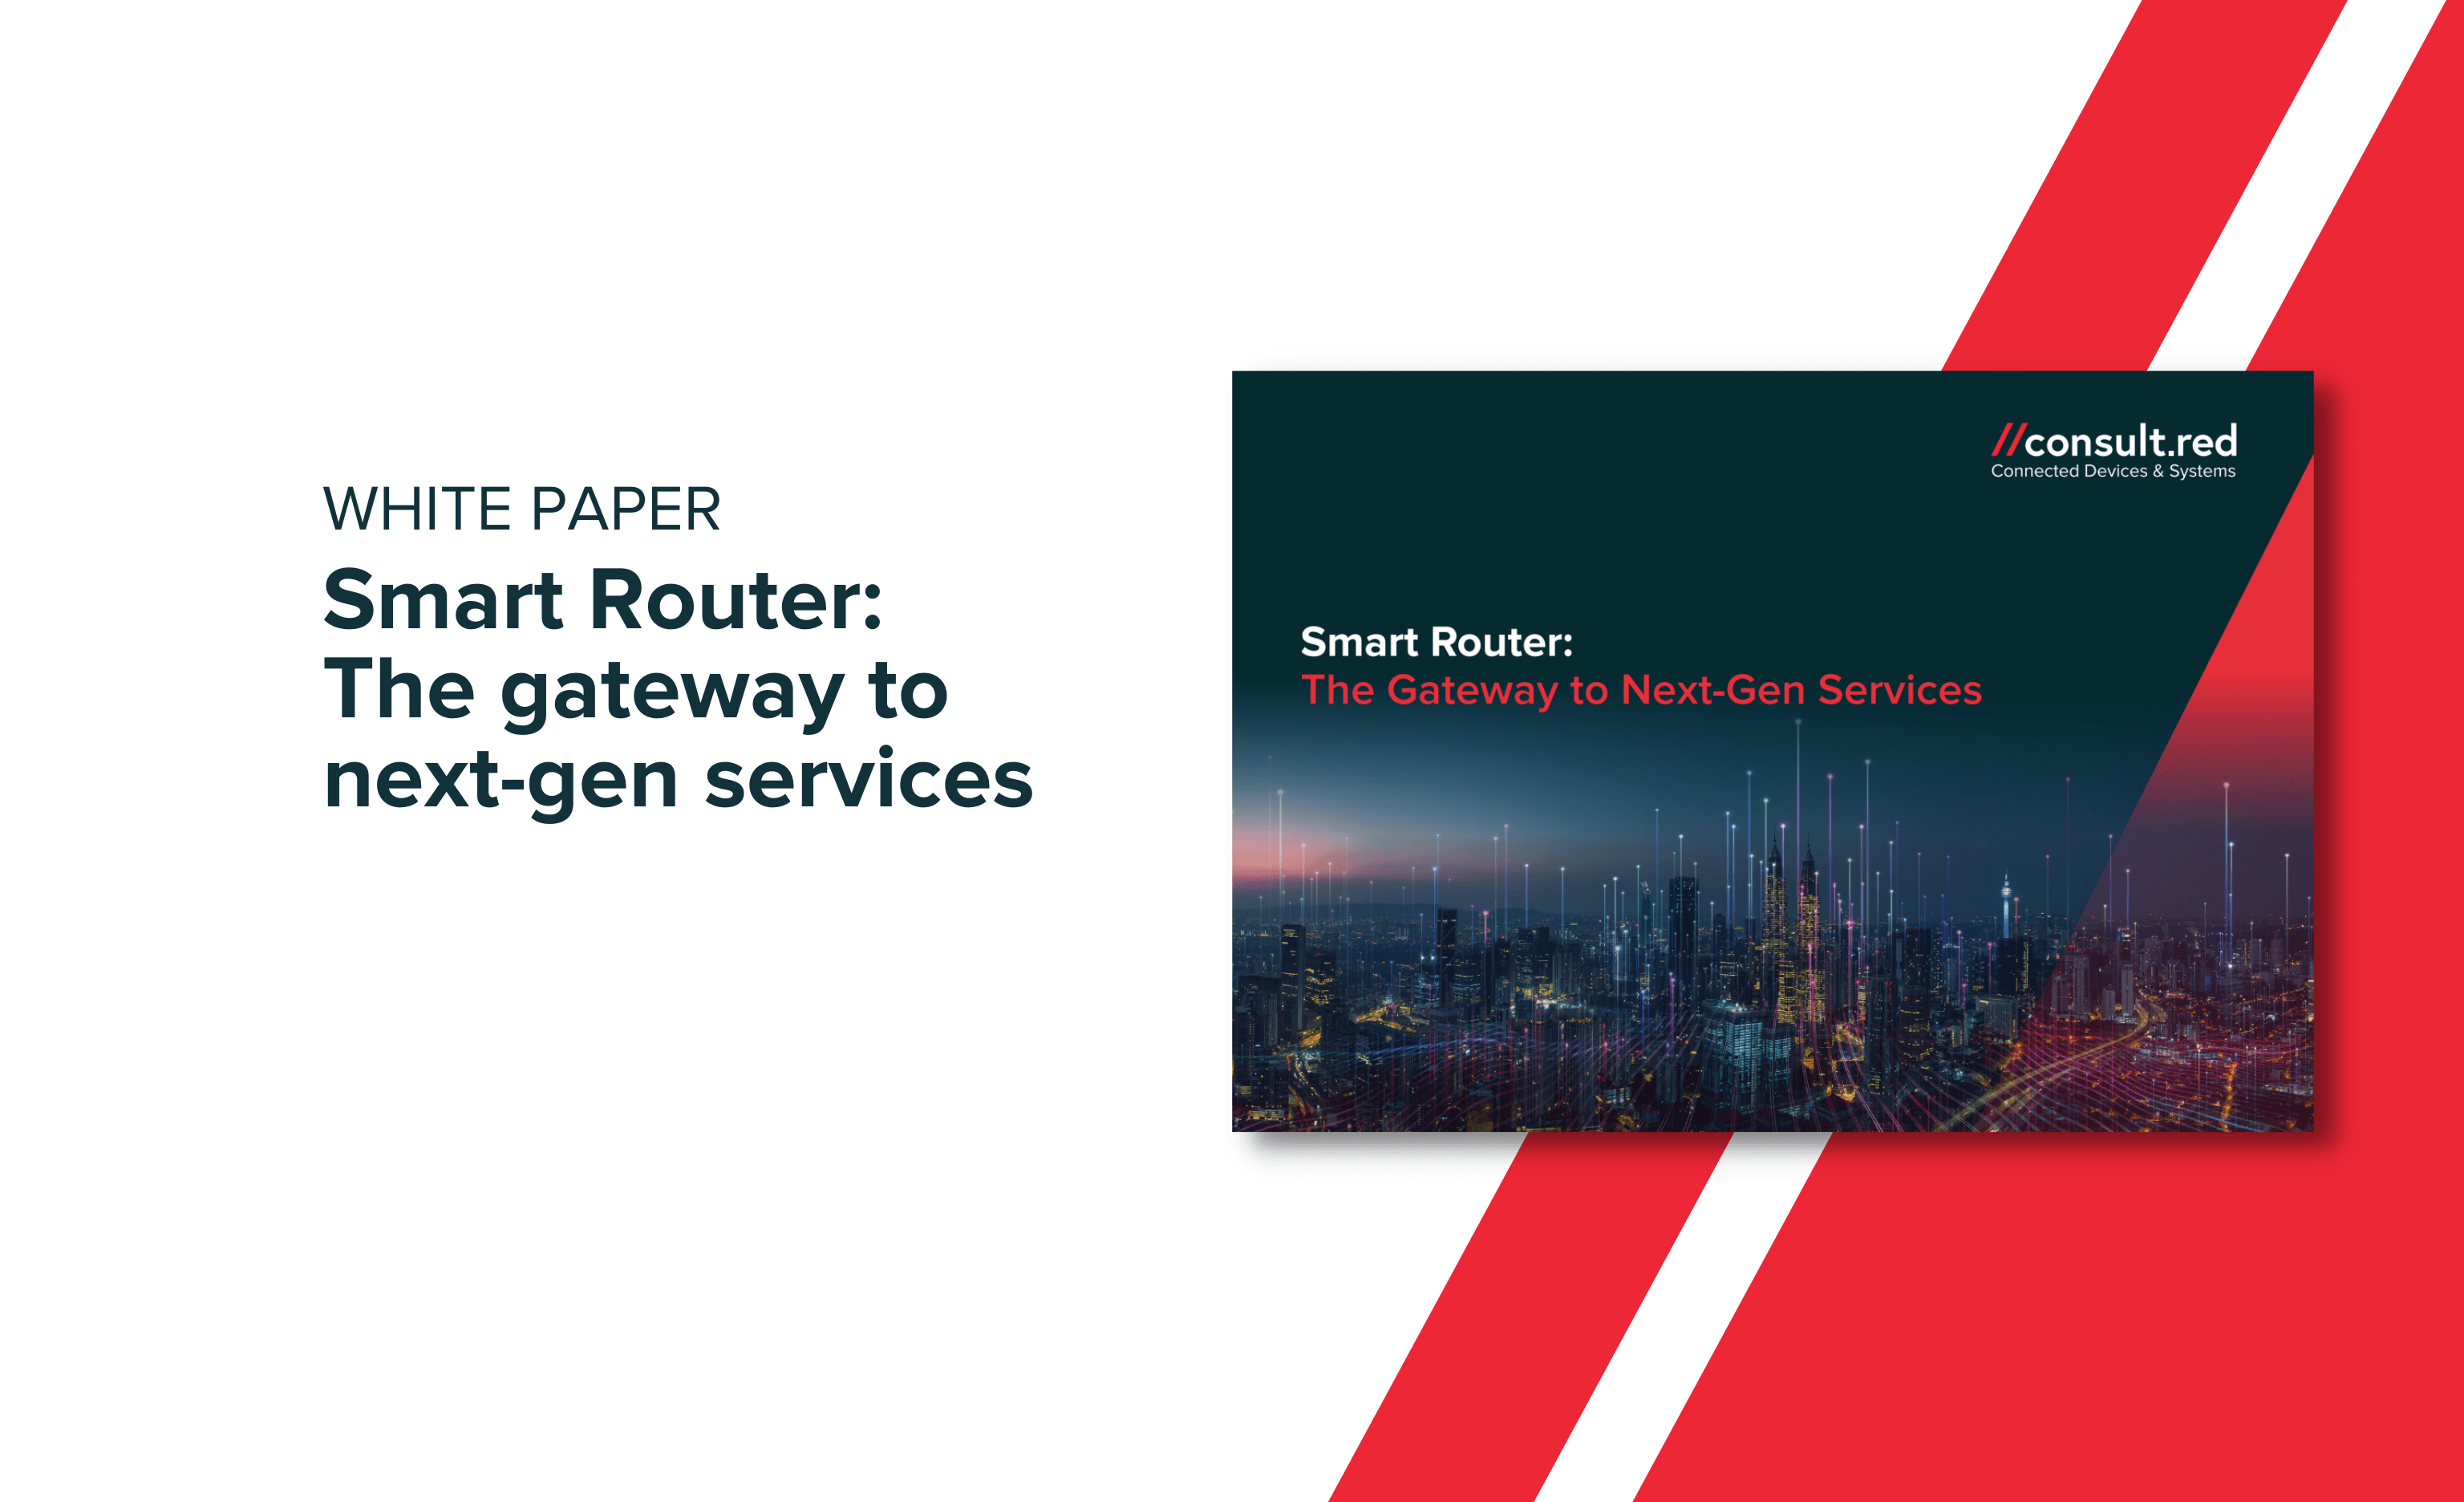 Read more about White Paper: Smart Router: The gateway to next-gen services